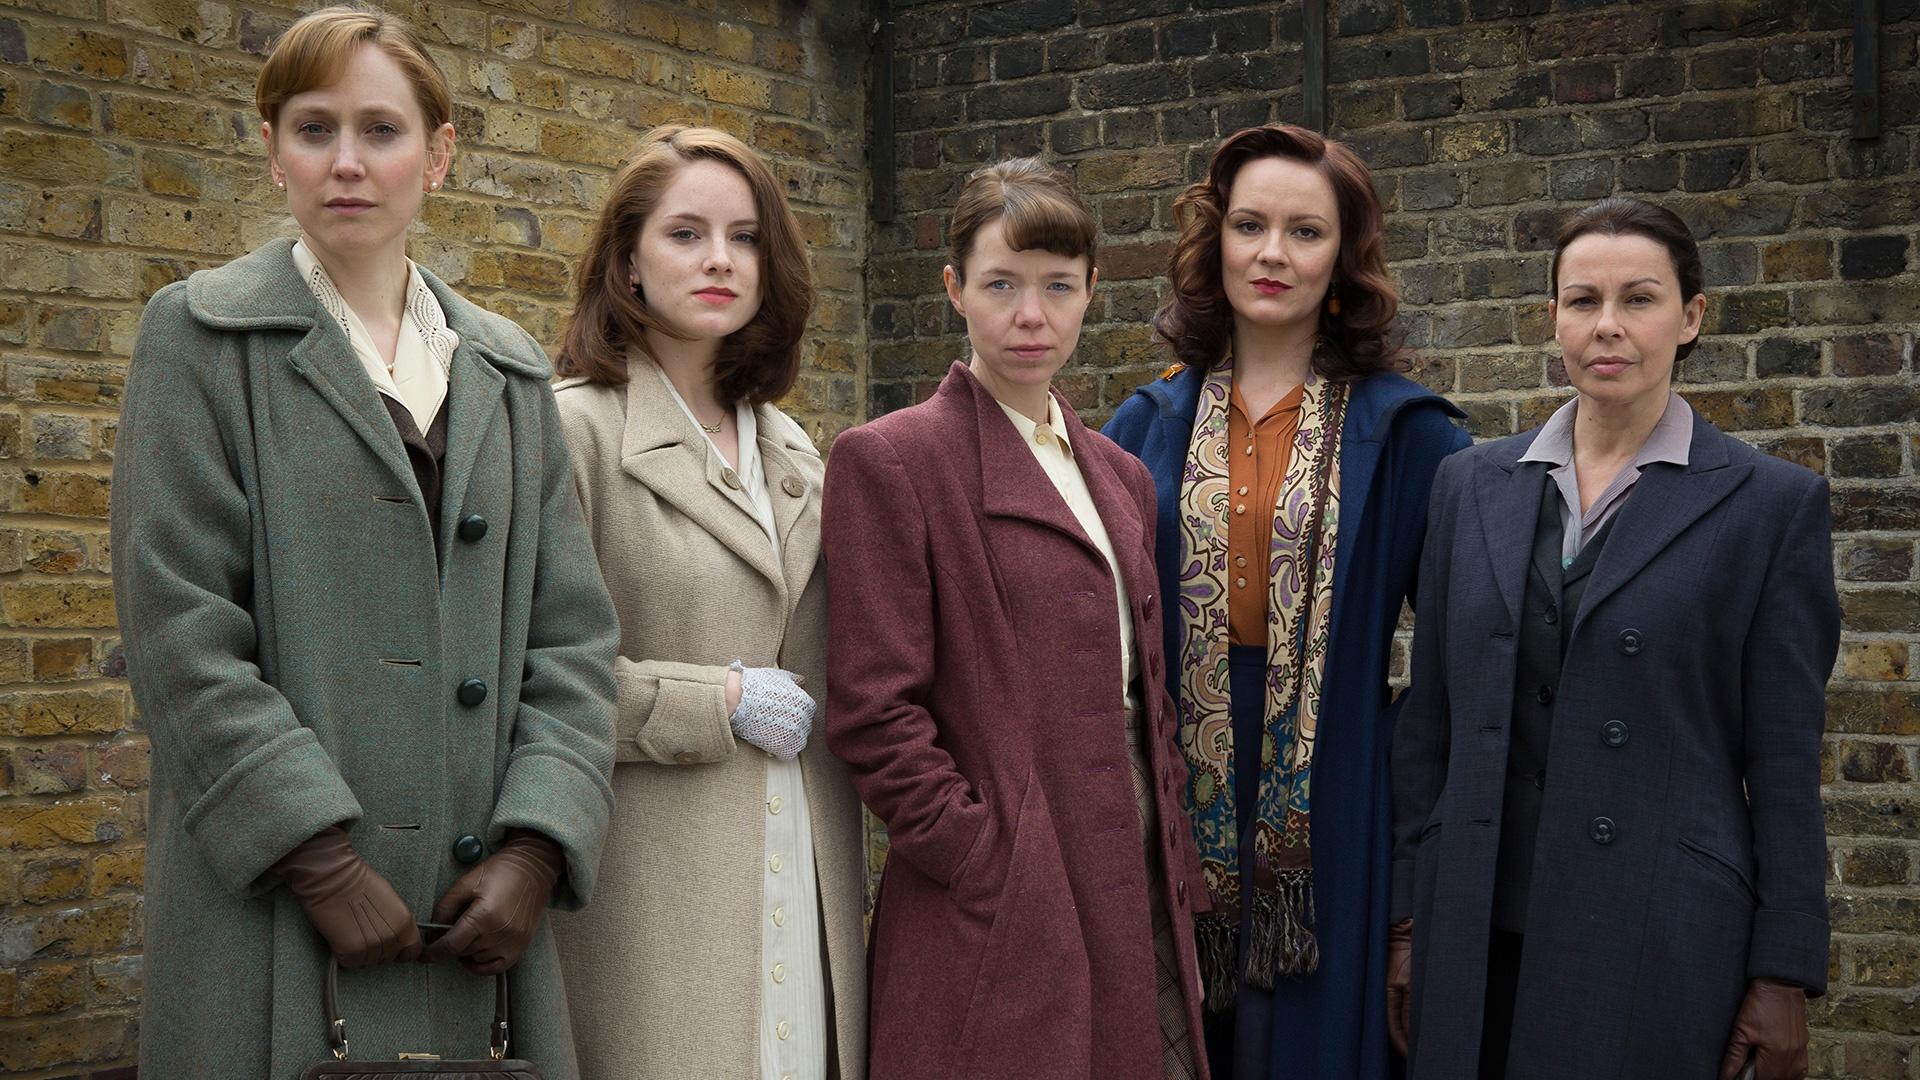 Watch Full Episodes Online of The Bletchley Circle on PBS